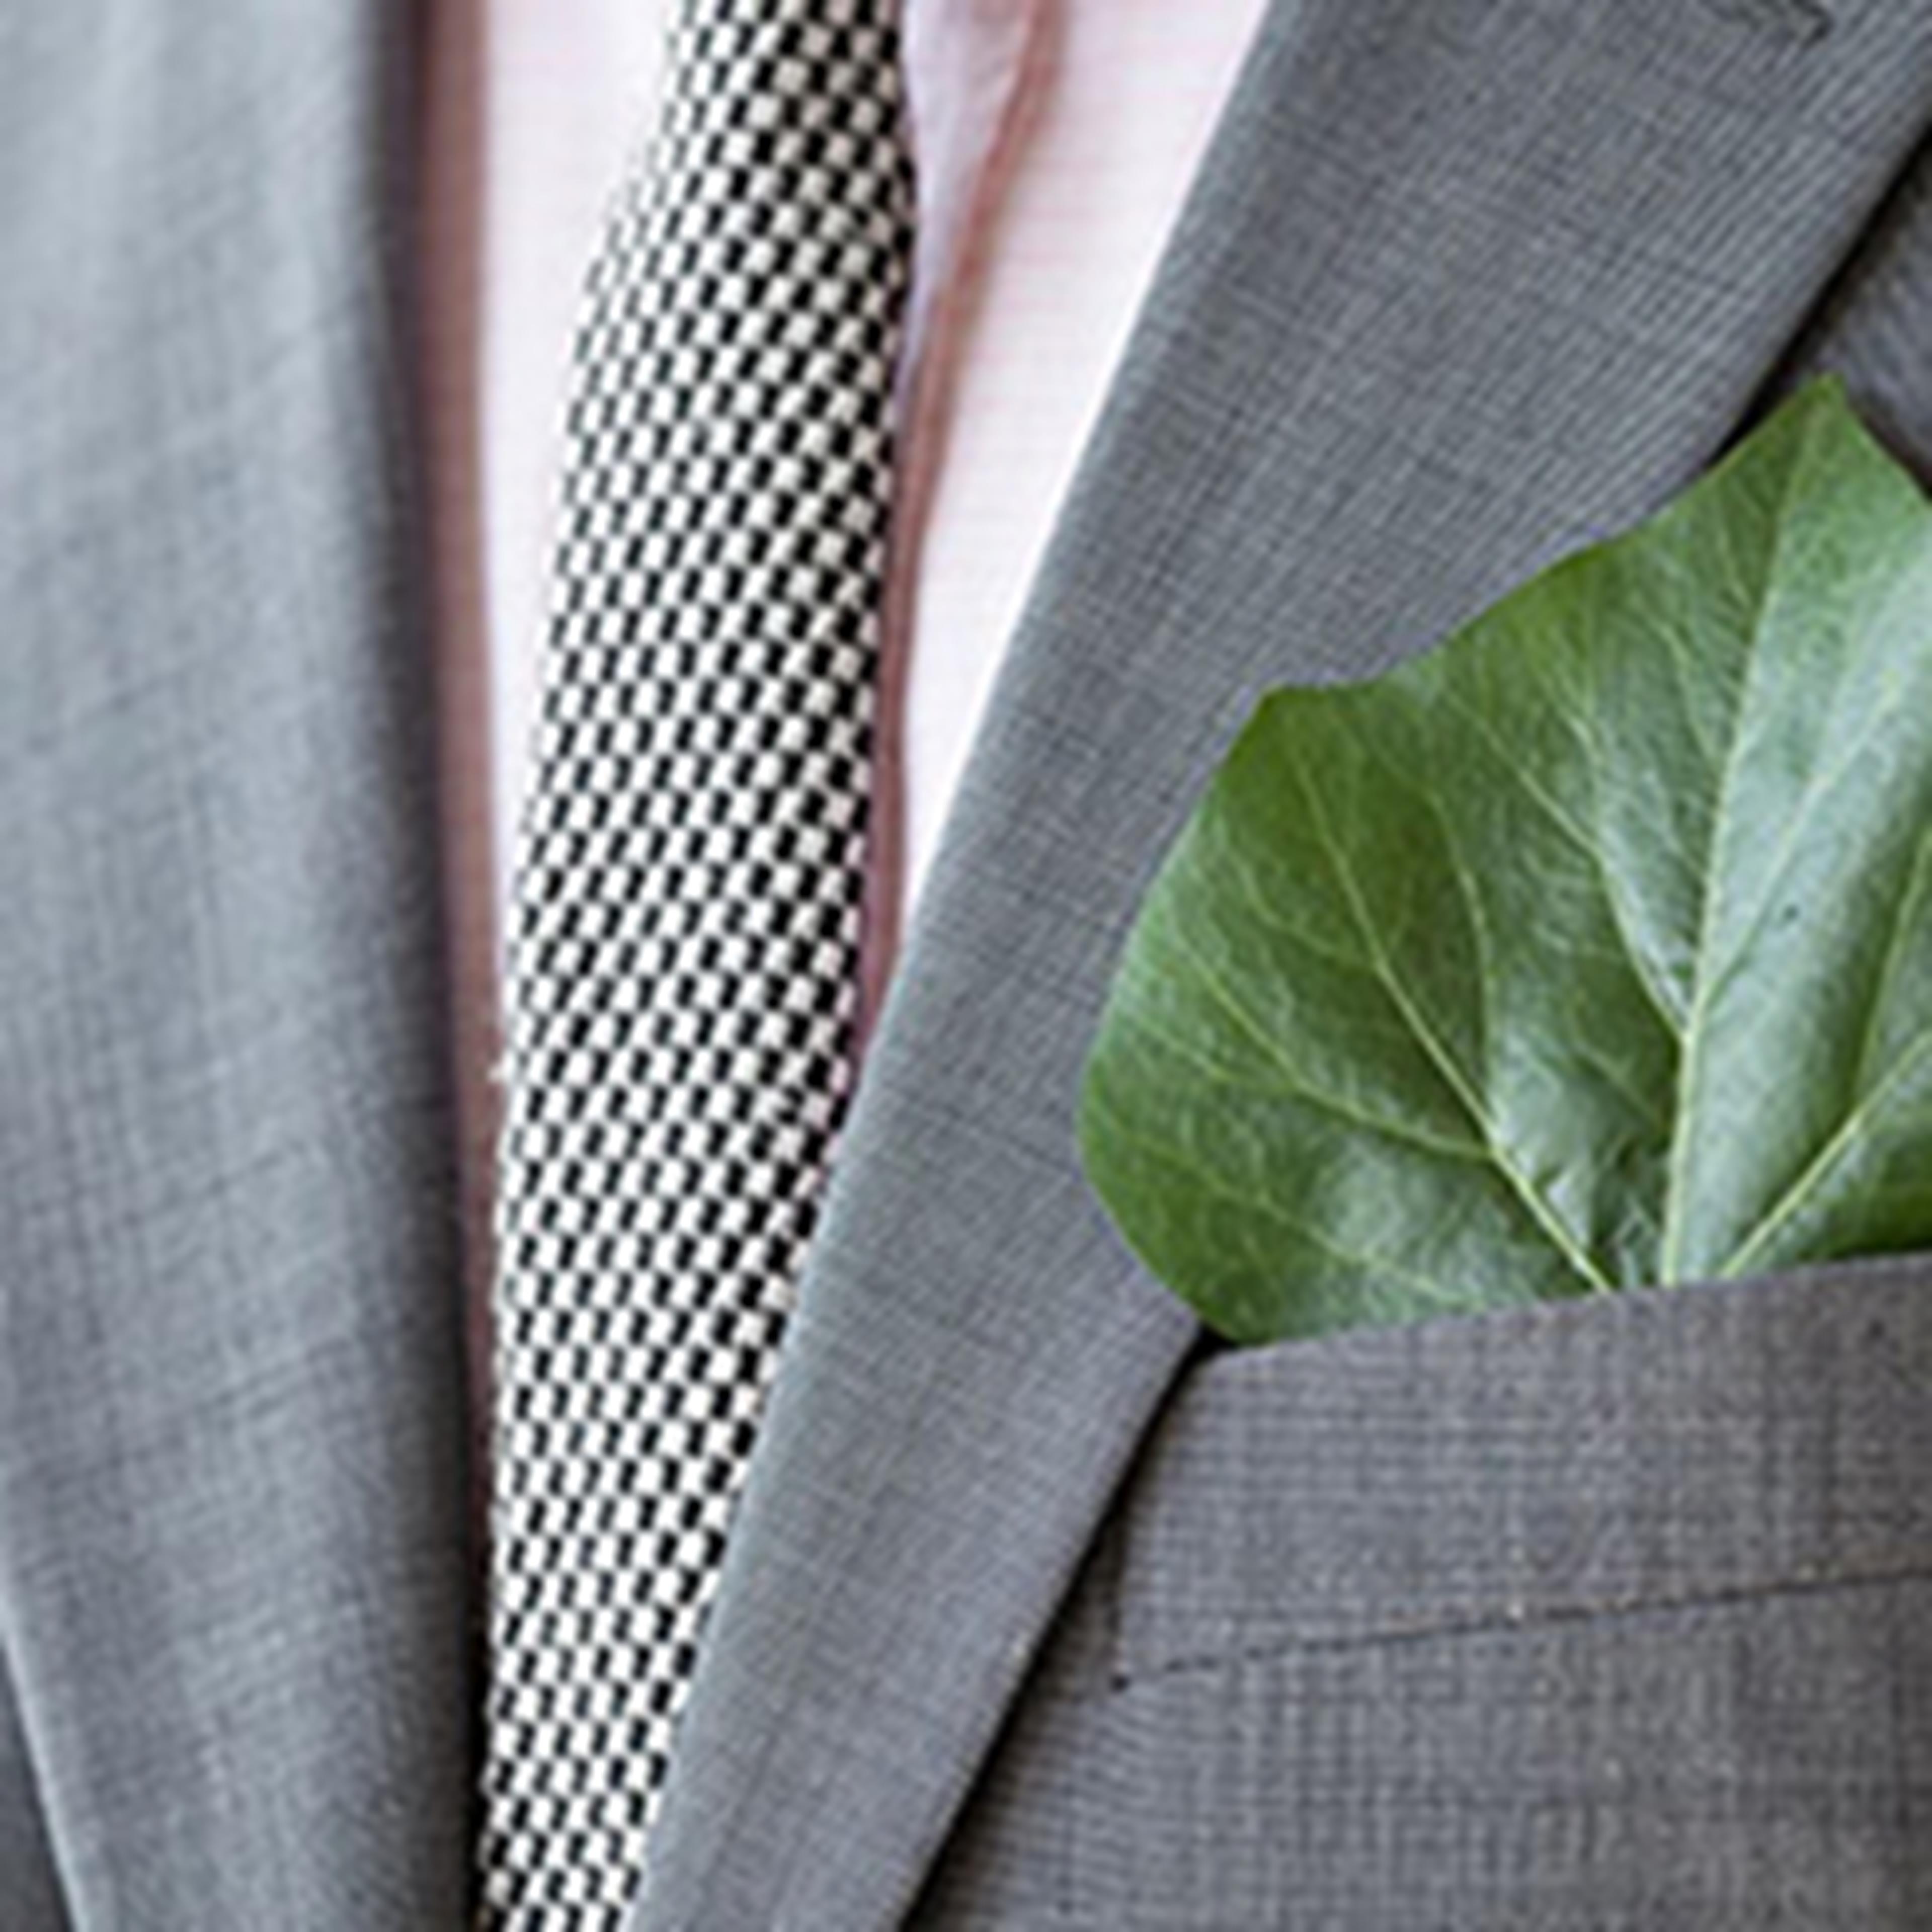 View of suit and tie with leaf in pocket